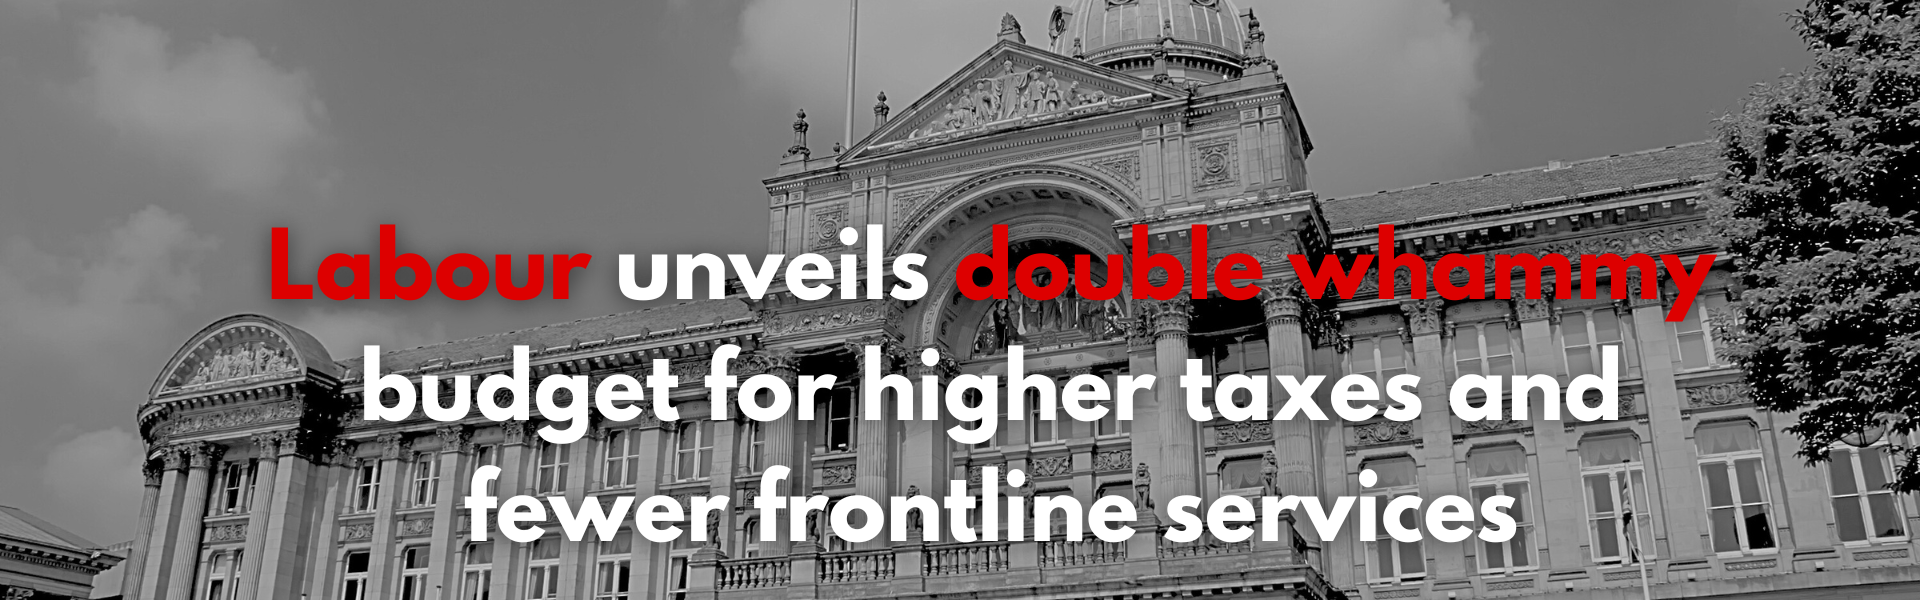 Labour unveil double whammy of higher taxes and fewer frontline services